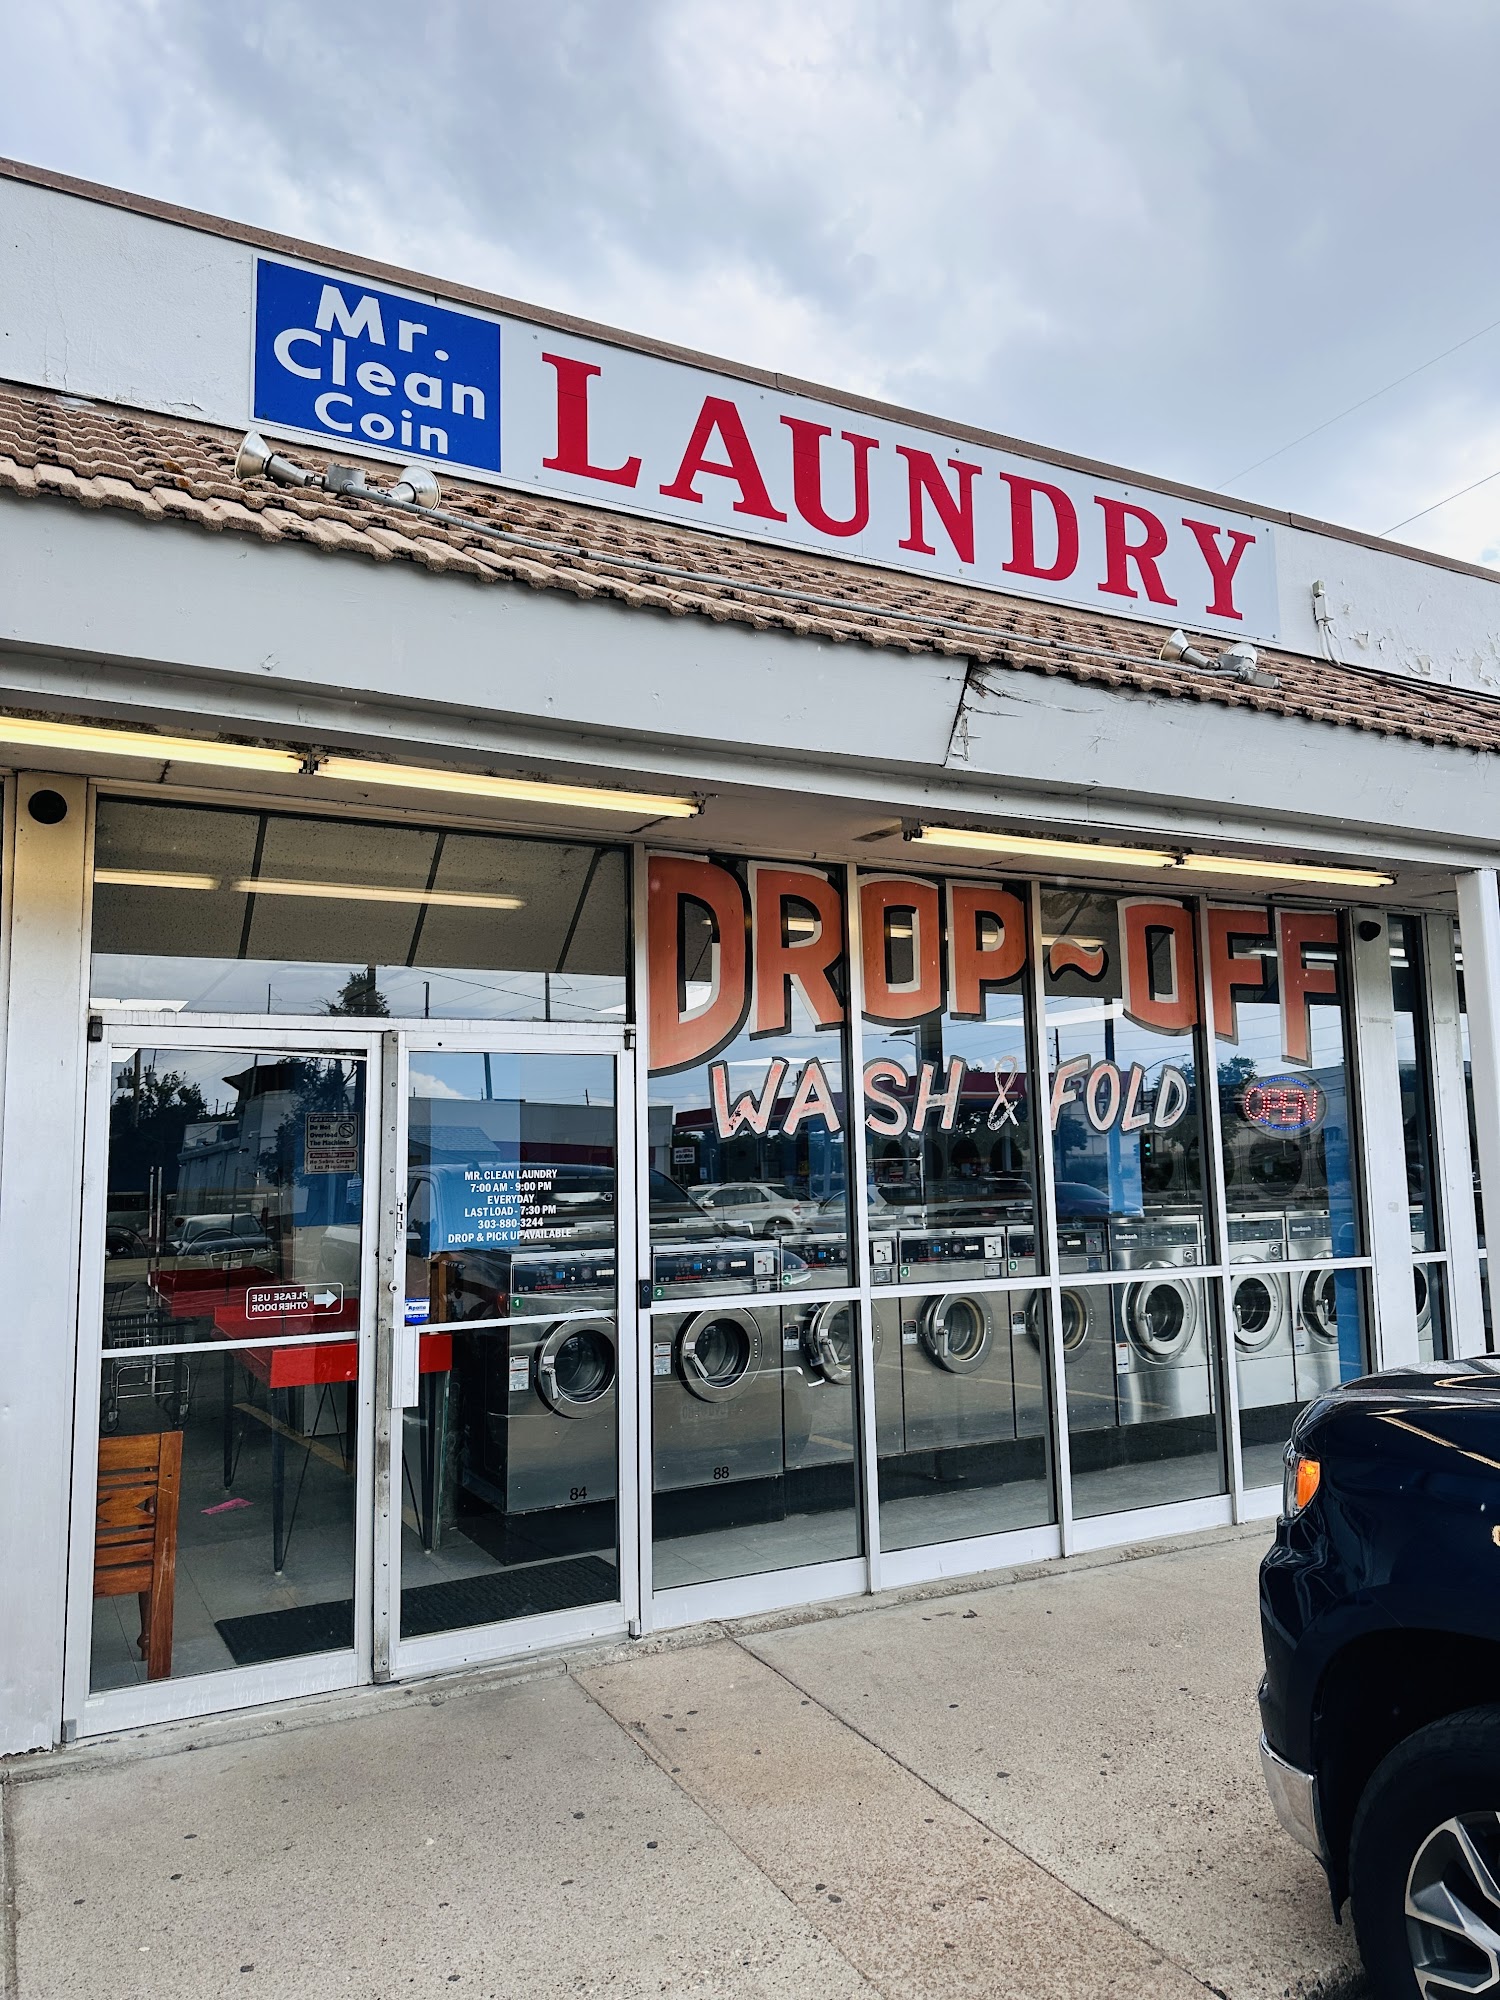 Mr. Clean Coin Laundry